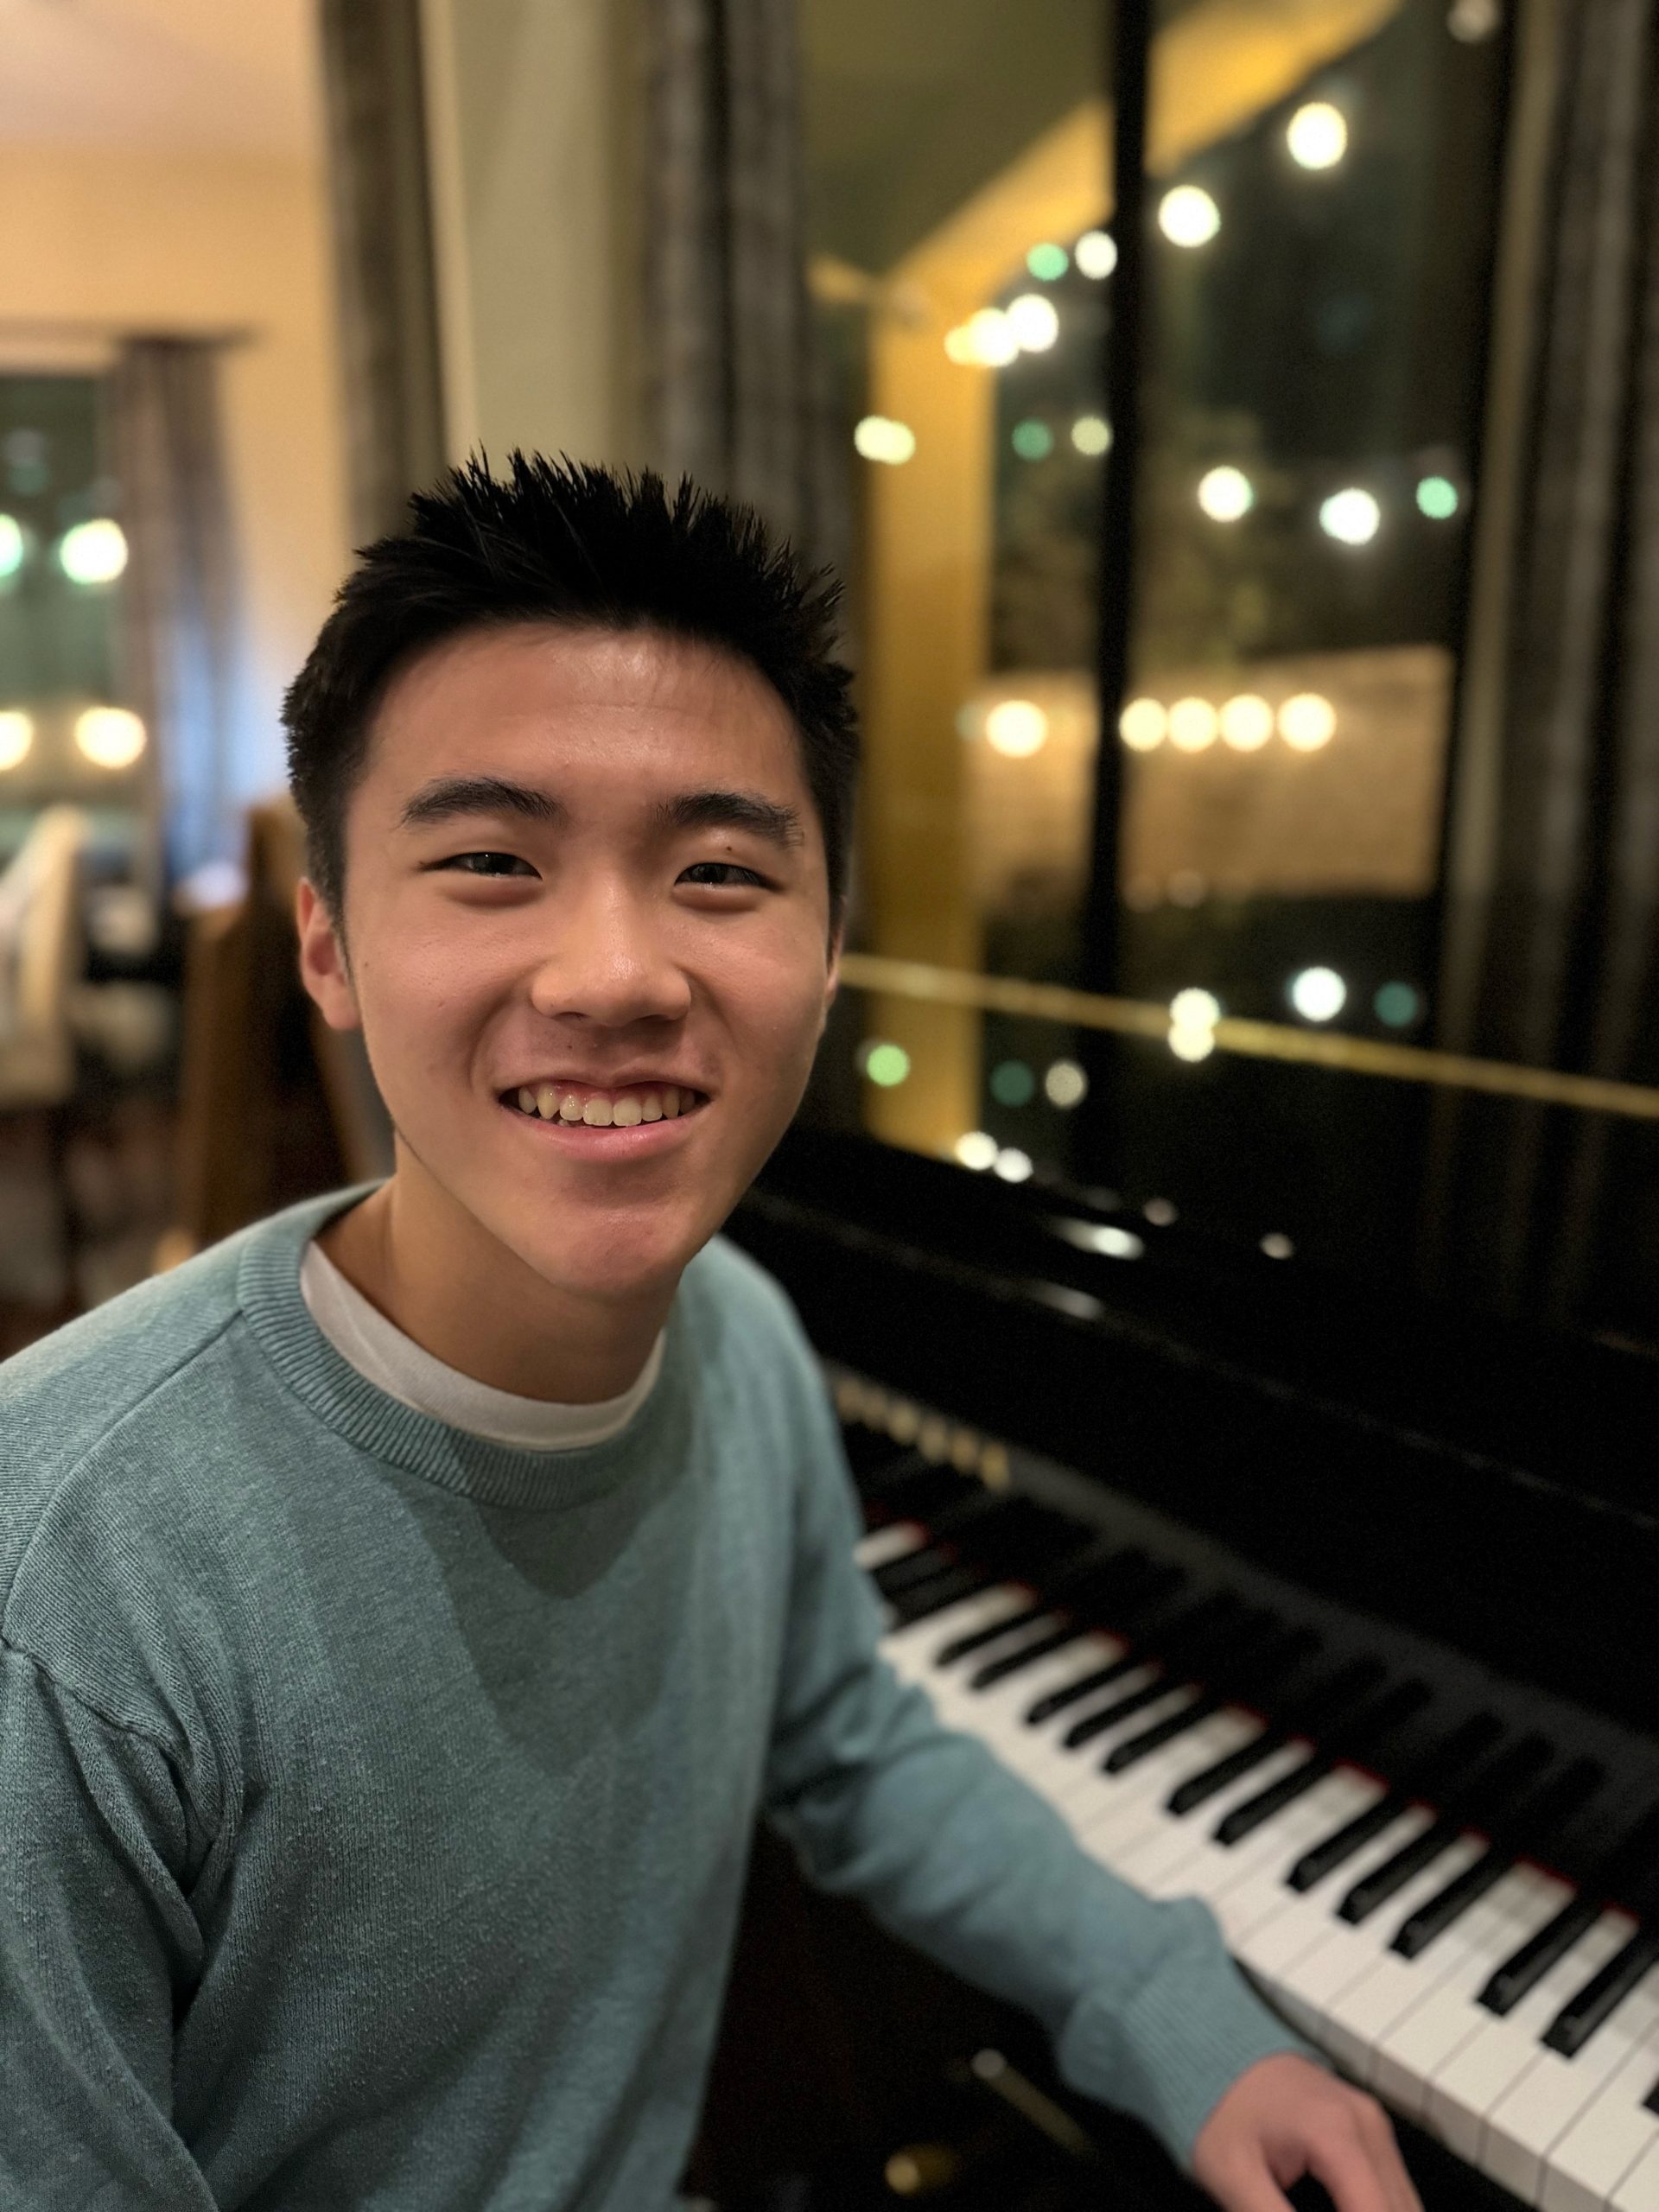 Young Composers Project Student Austin Lee Shares His Thoughts on the Program and the Impact It’s Made on His Life